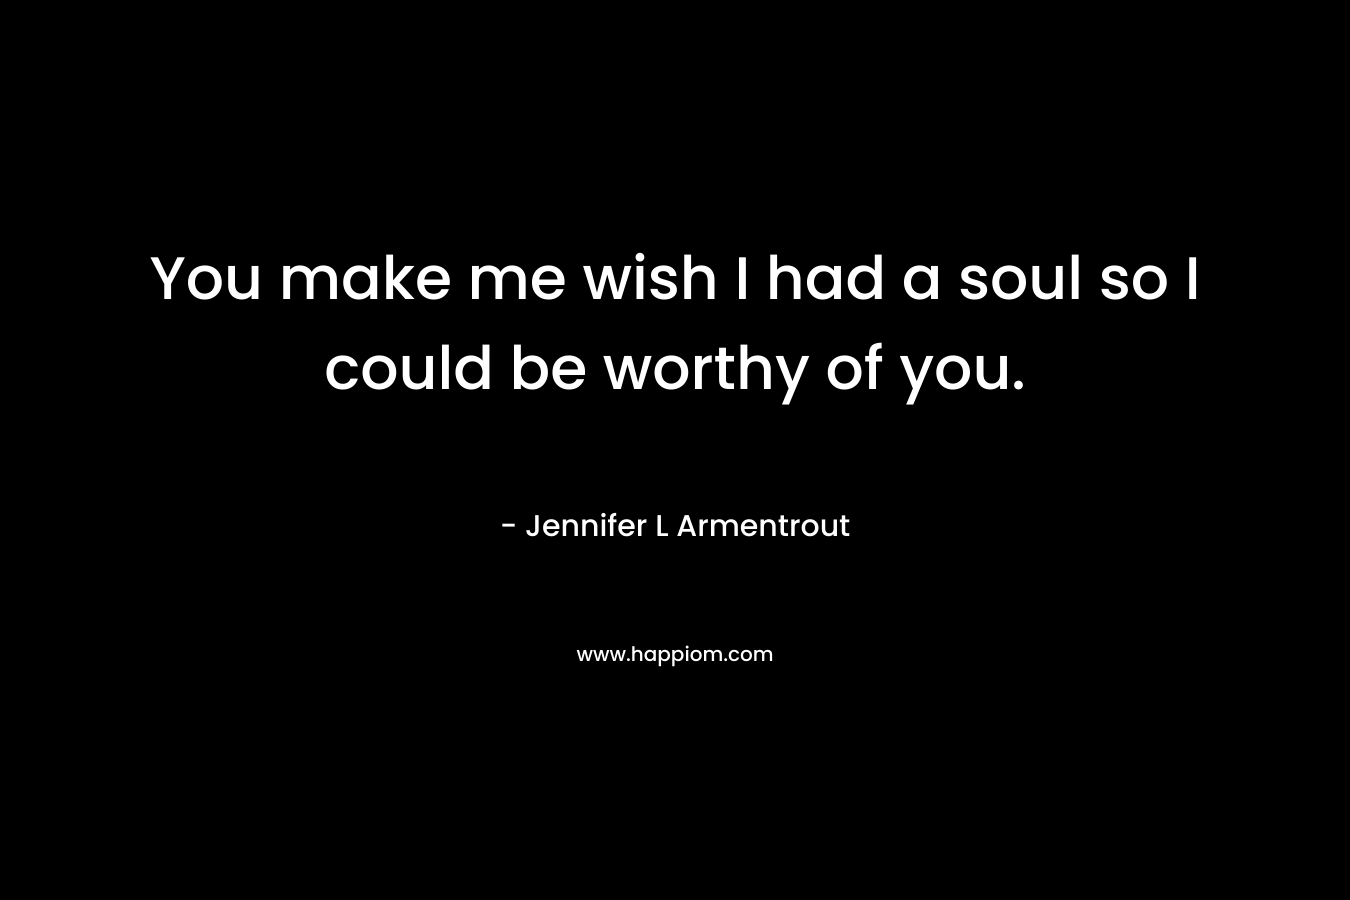 You make me wish I had a soul so I could be worthy of you.